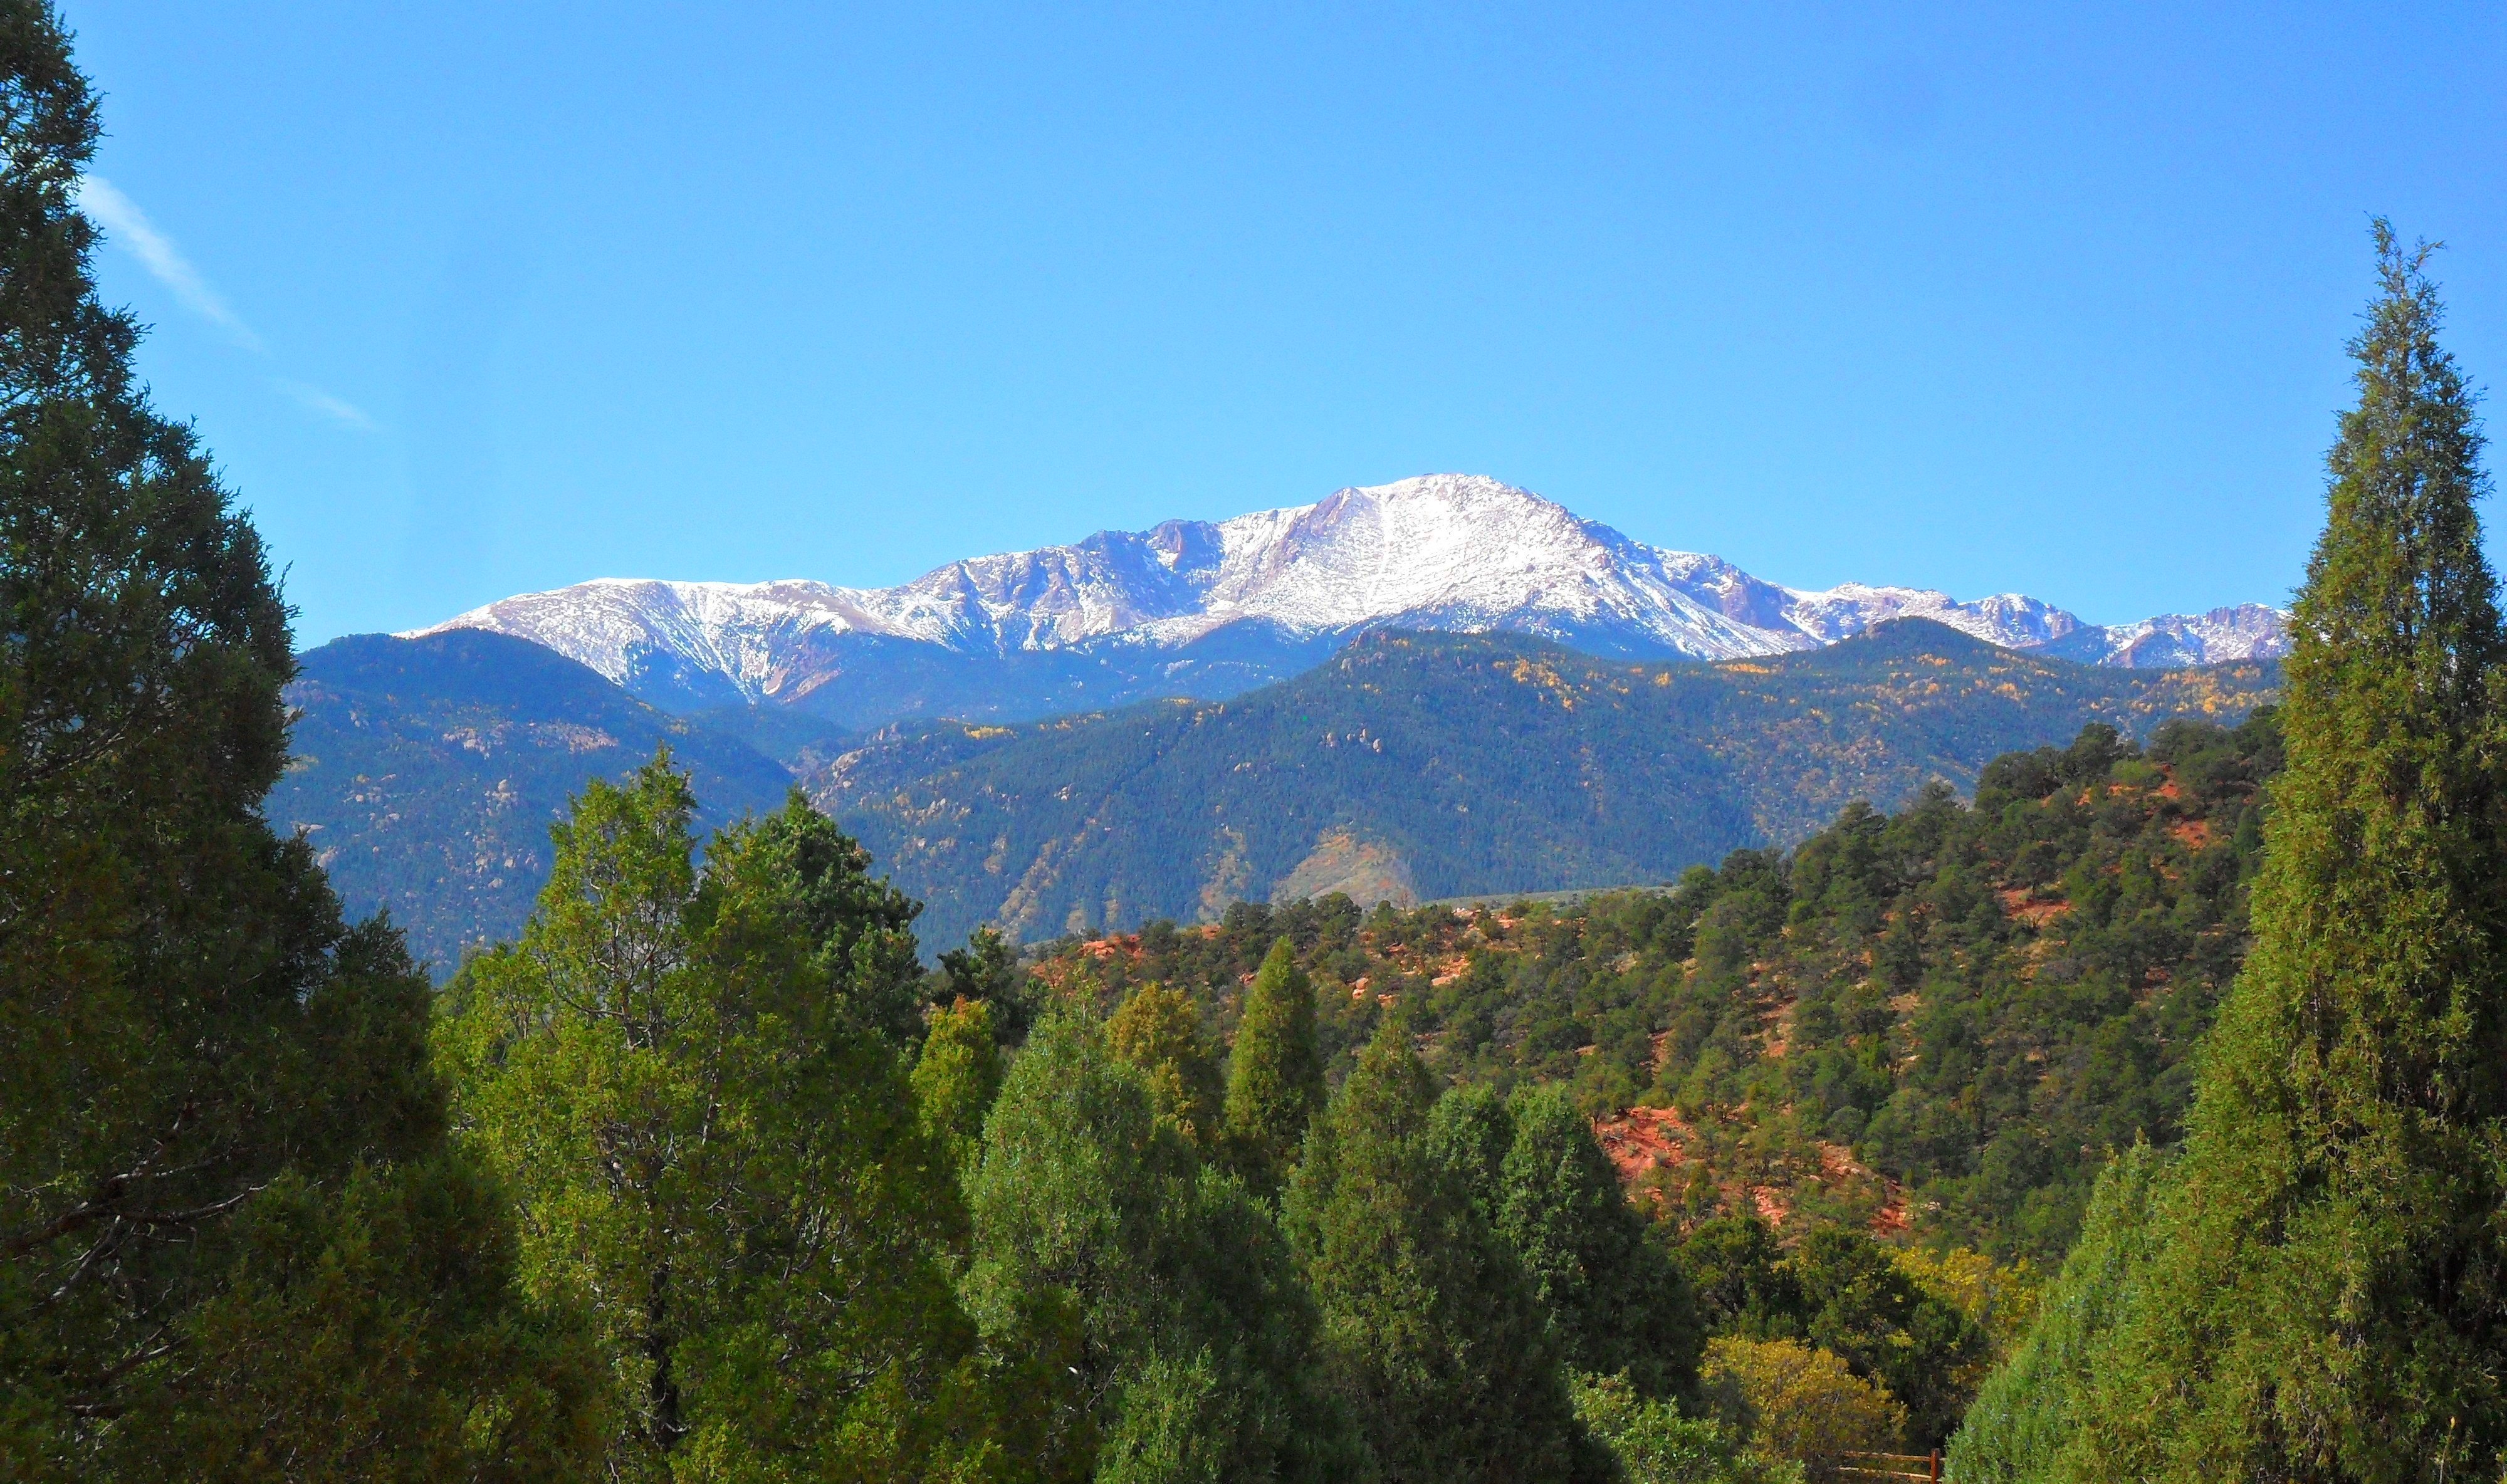 Pikes Peak_Colorado Springs_Fort Carson_What Things to Do.jpg